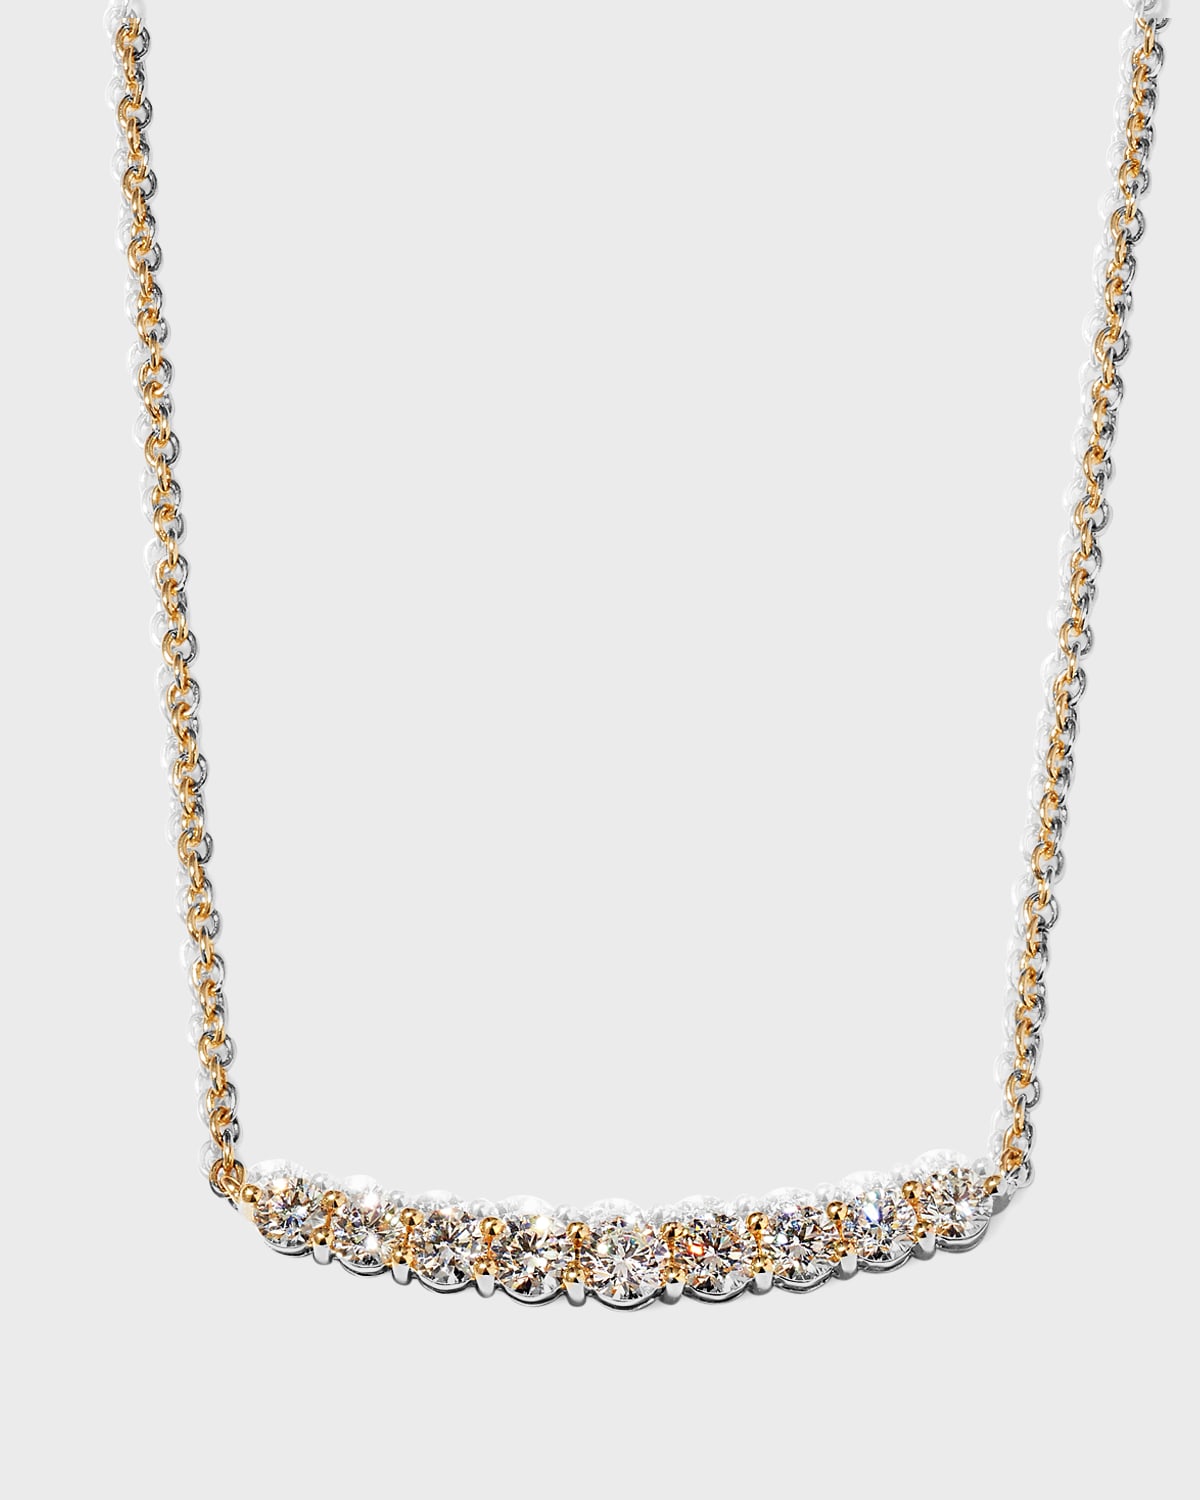 Delilah Diamond Crescent Necklace in 18k Yellow Gold